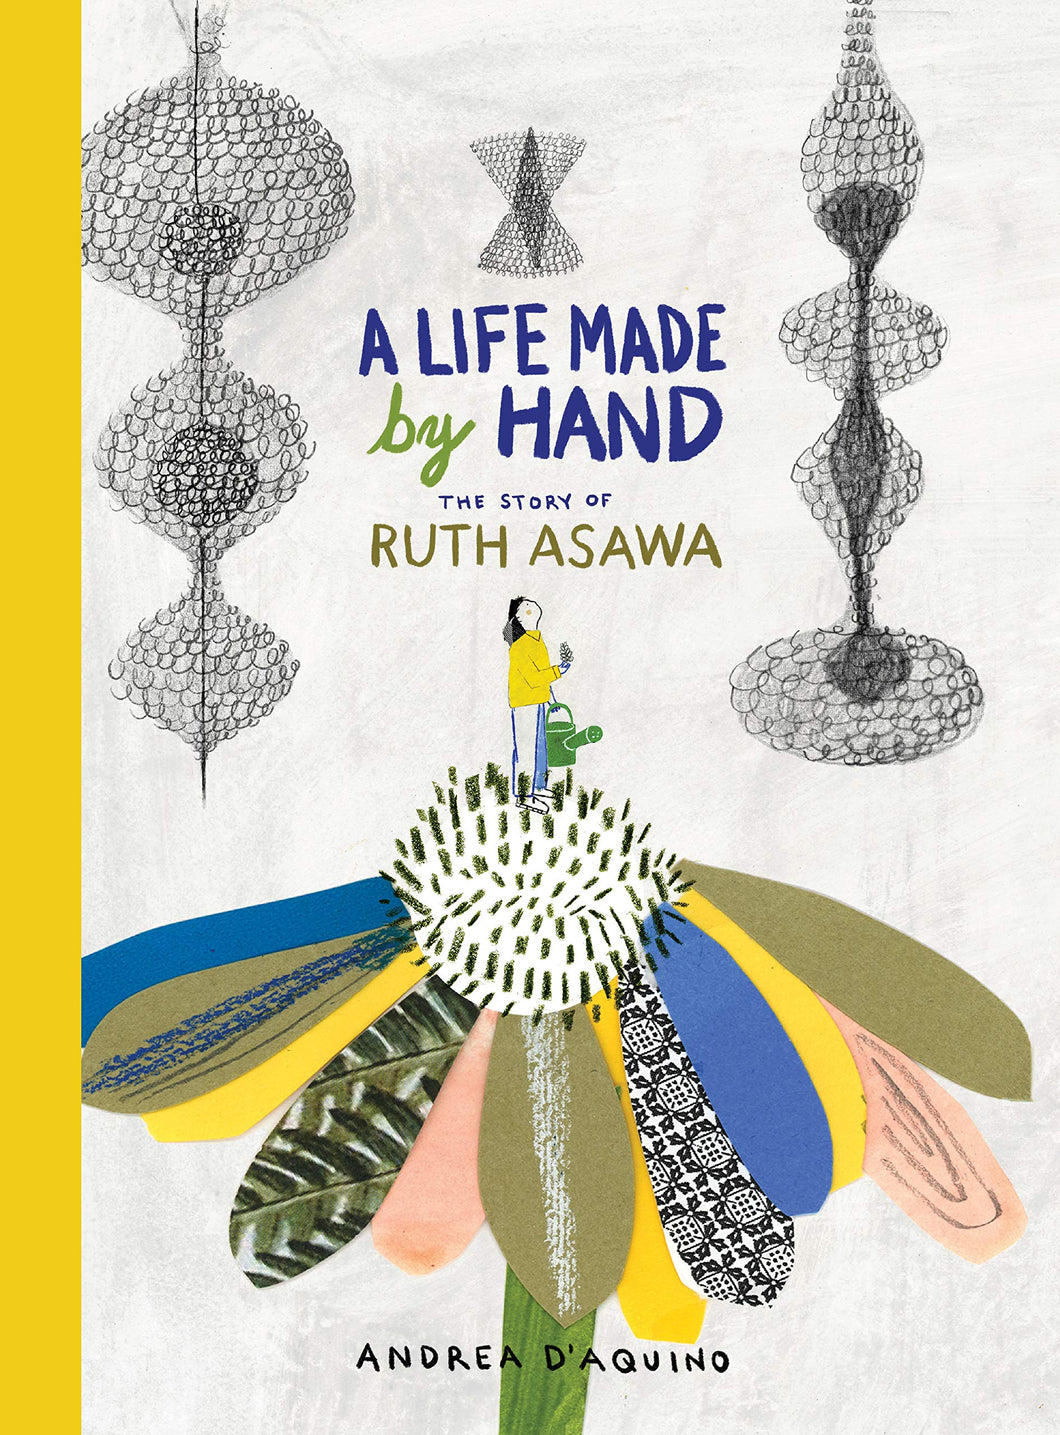 A Life Made by Hand: The Story of Ruth Asawa by Andrea D'Aquino